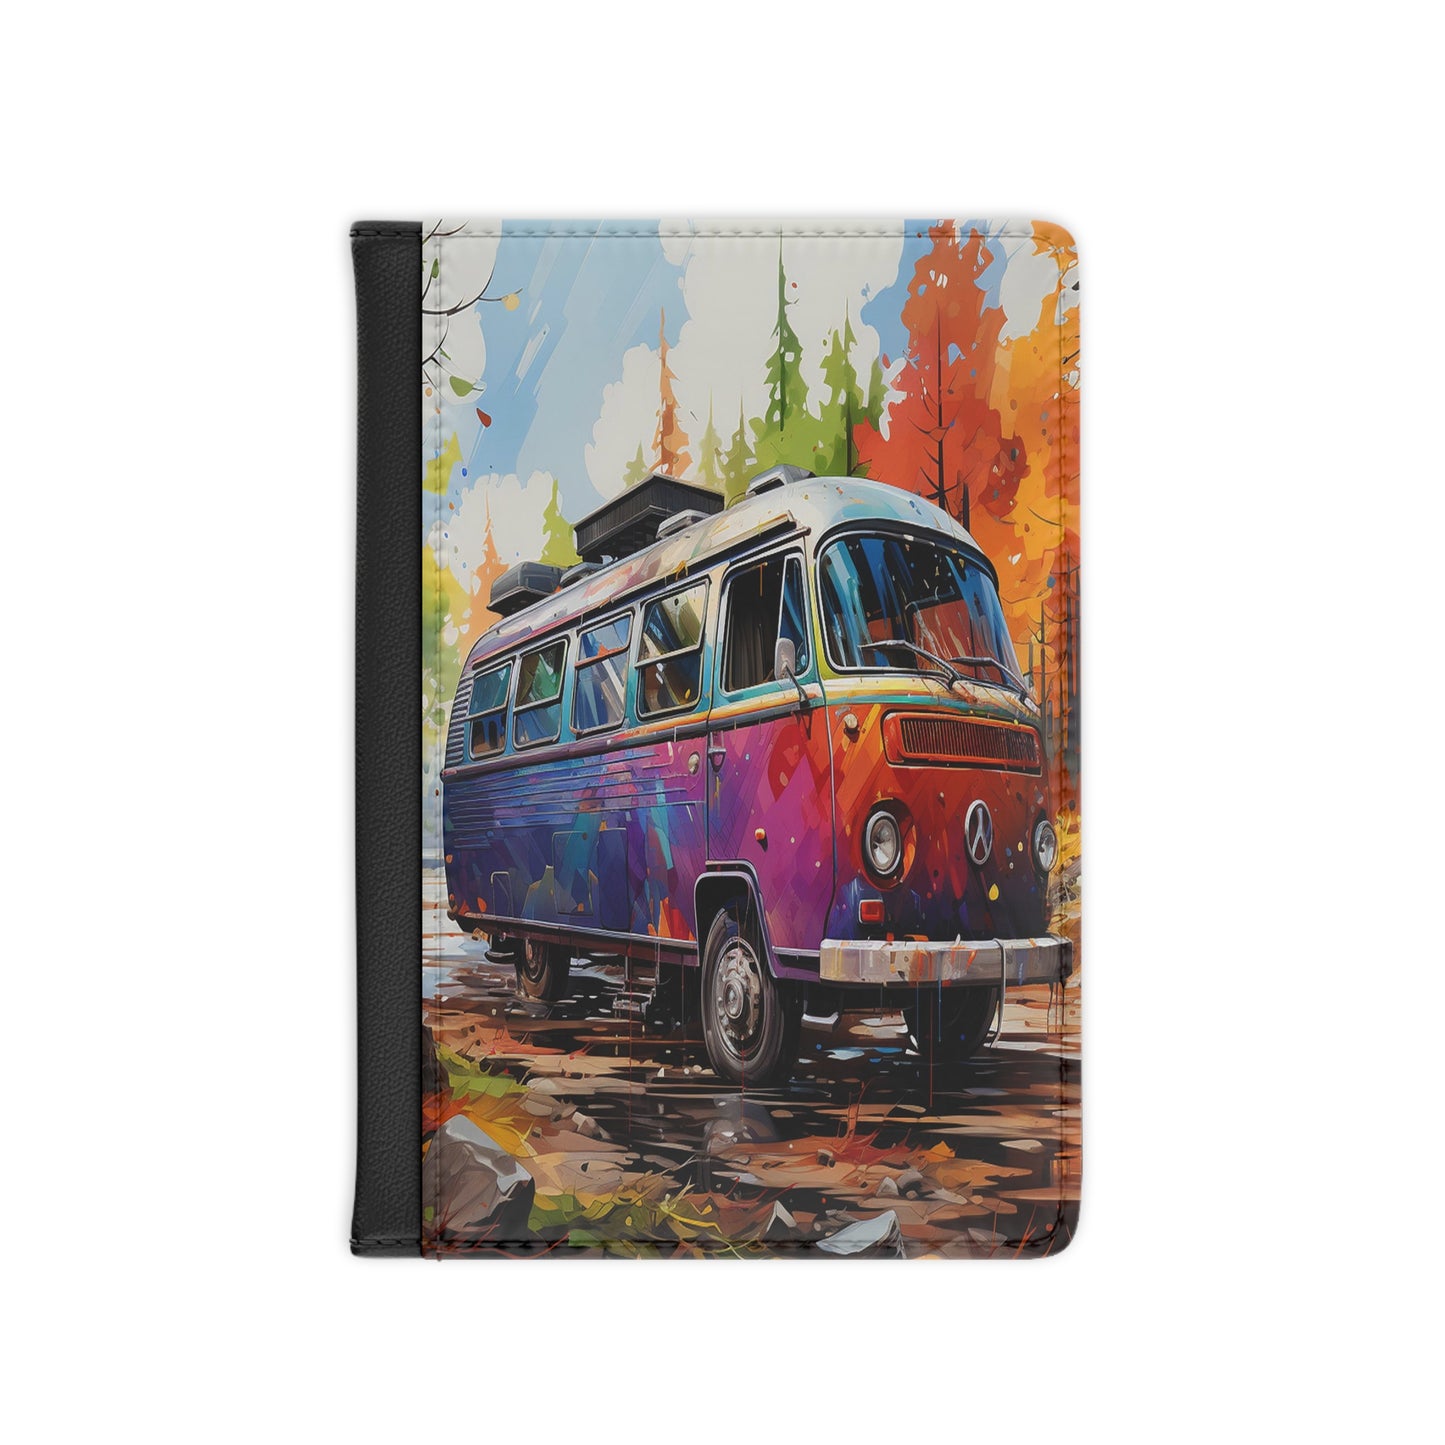 Bohemian Road Trip Passport Cover | Voyage of Colors Collection | Passport Covers | Travel accessories | Christmas gift